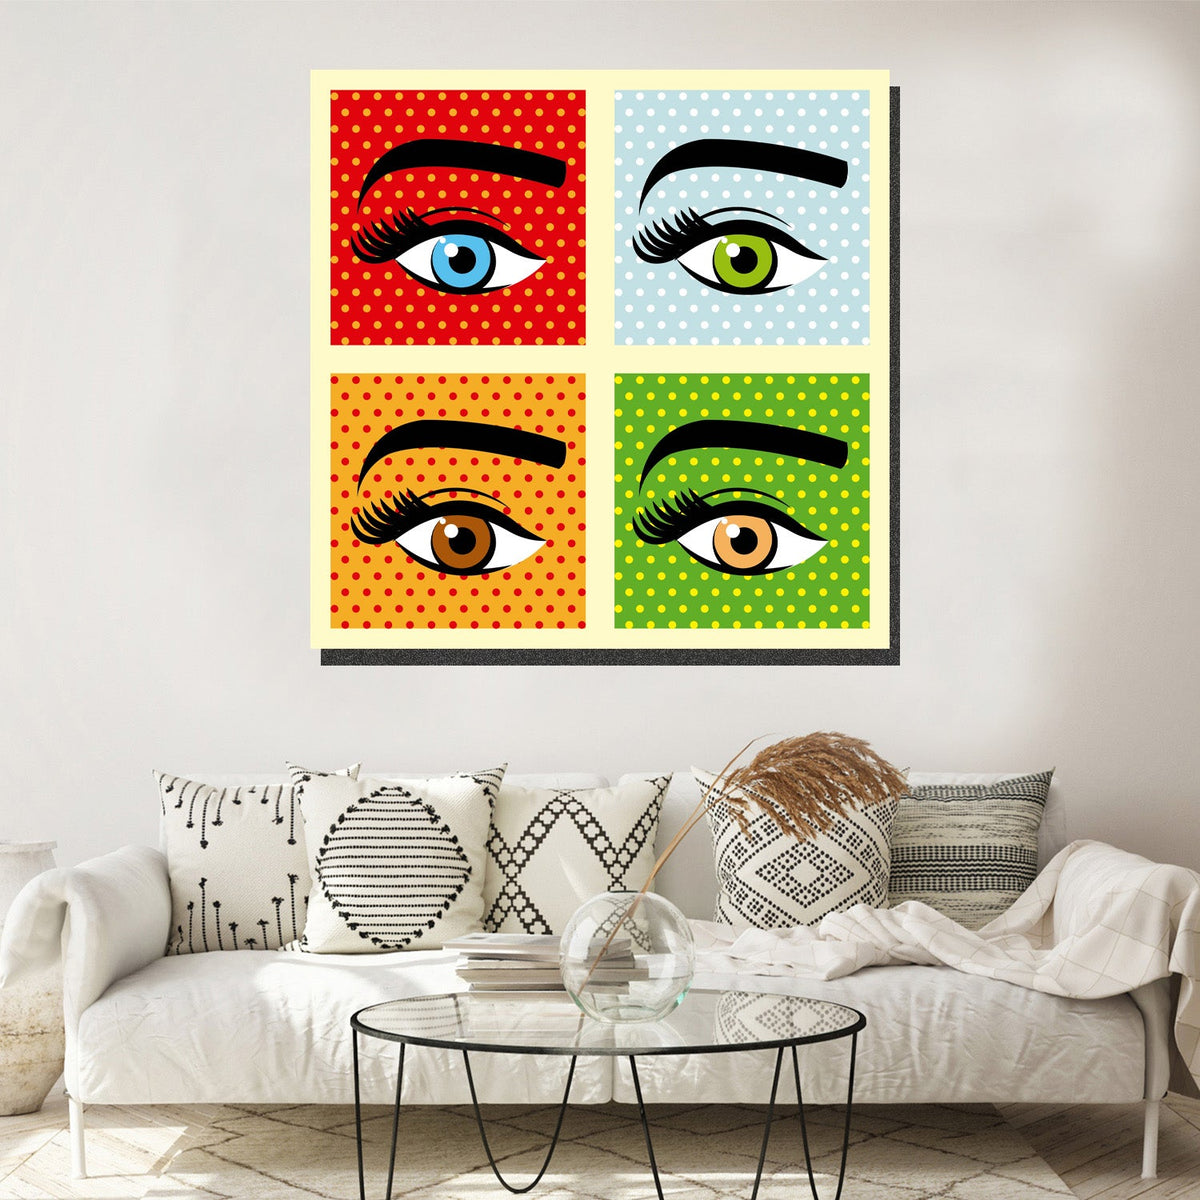 https://cdn.shopify.com/s/files/1/0387/9986/8044/products/EyesonYouCanvasArtprintStretched-3.jpg